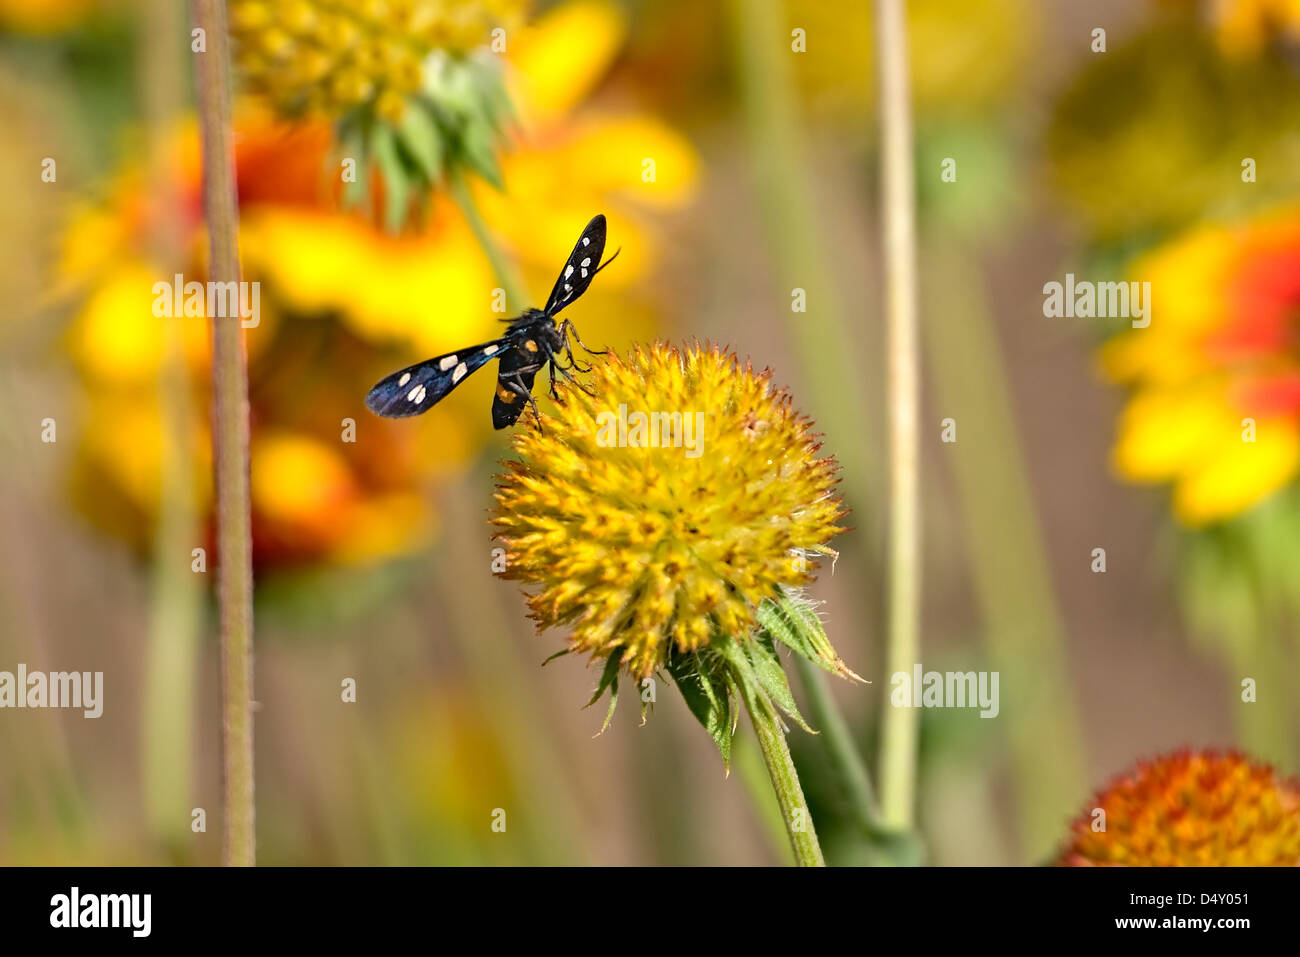 Black butterfly on the yellow flower Stock Photo